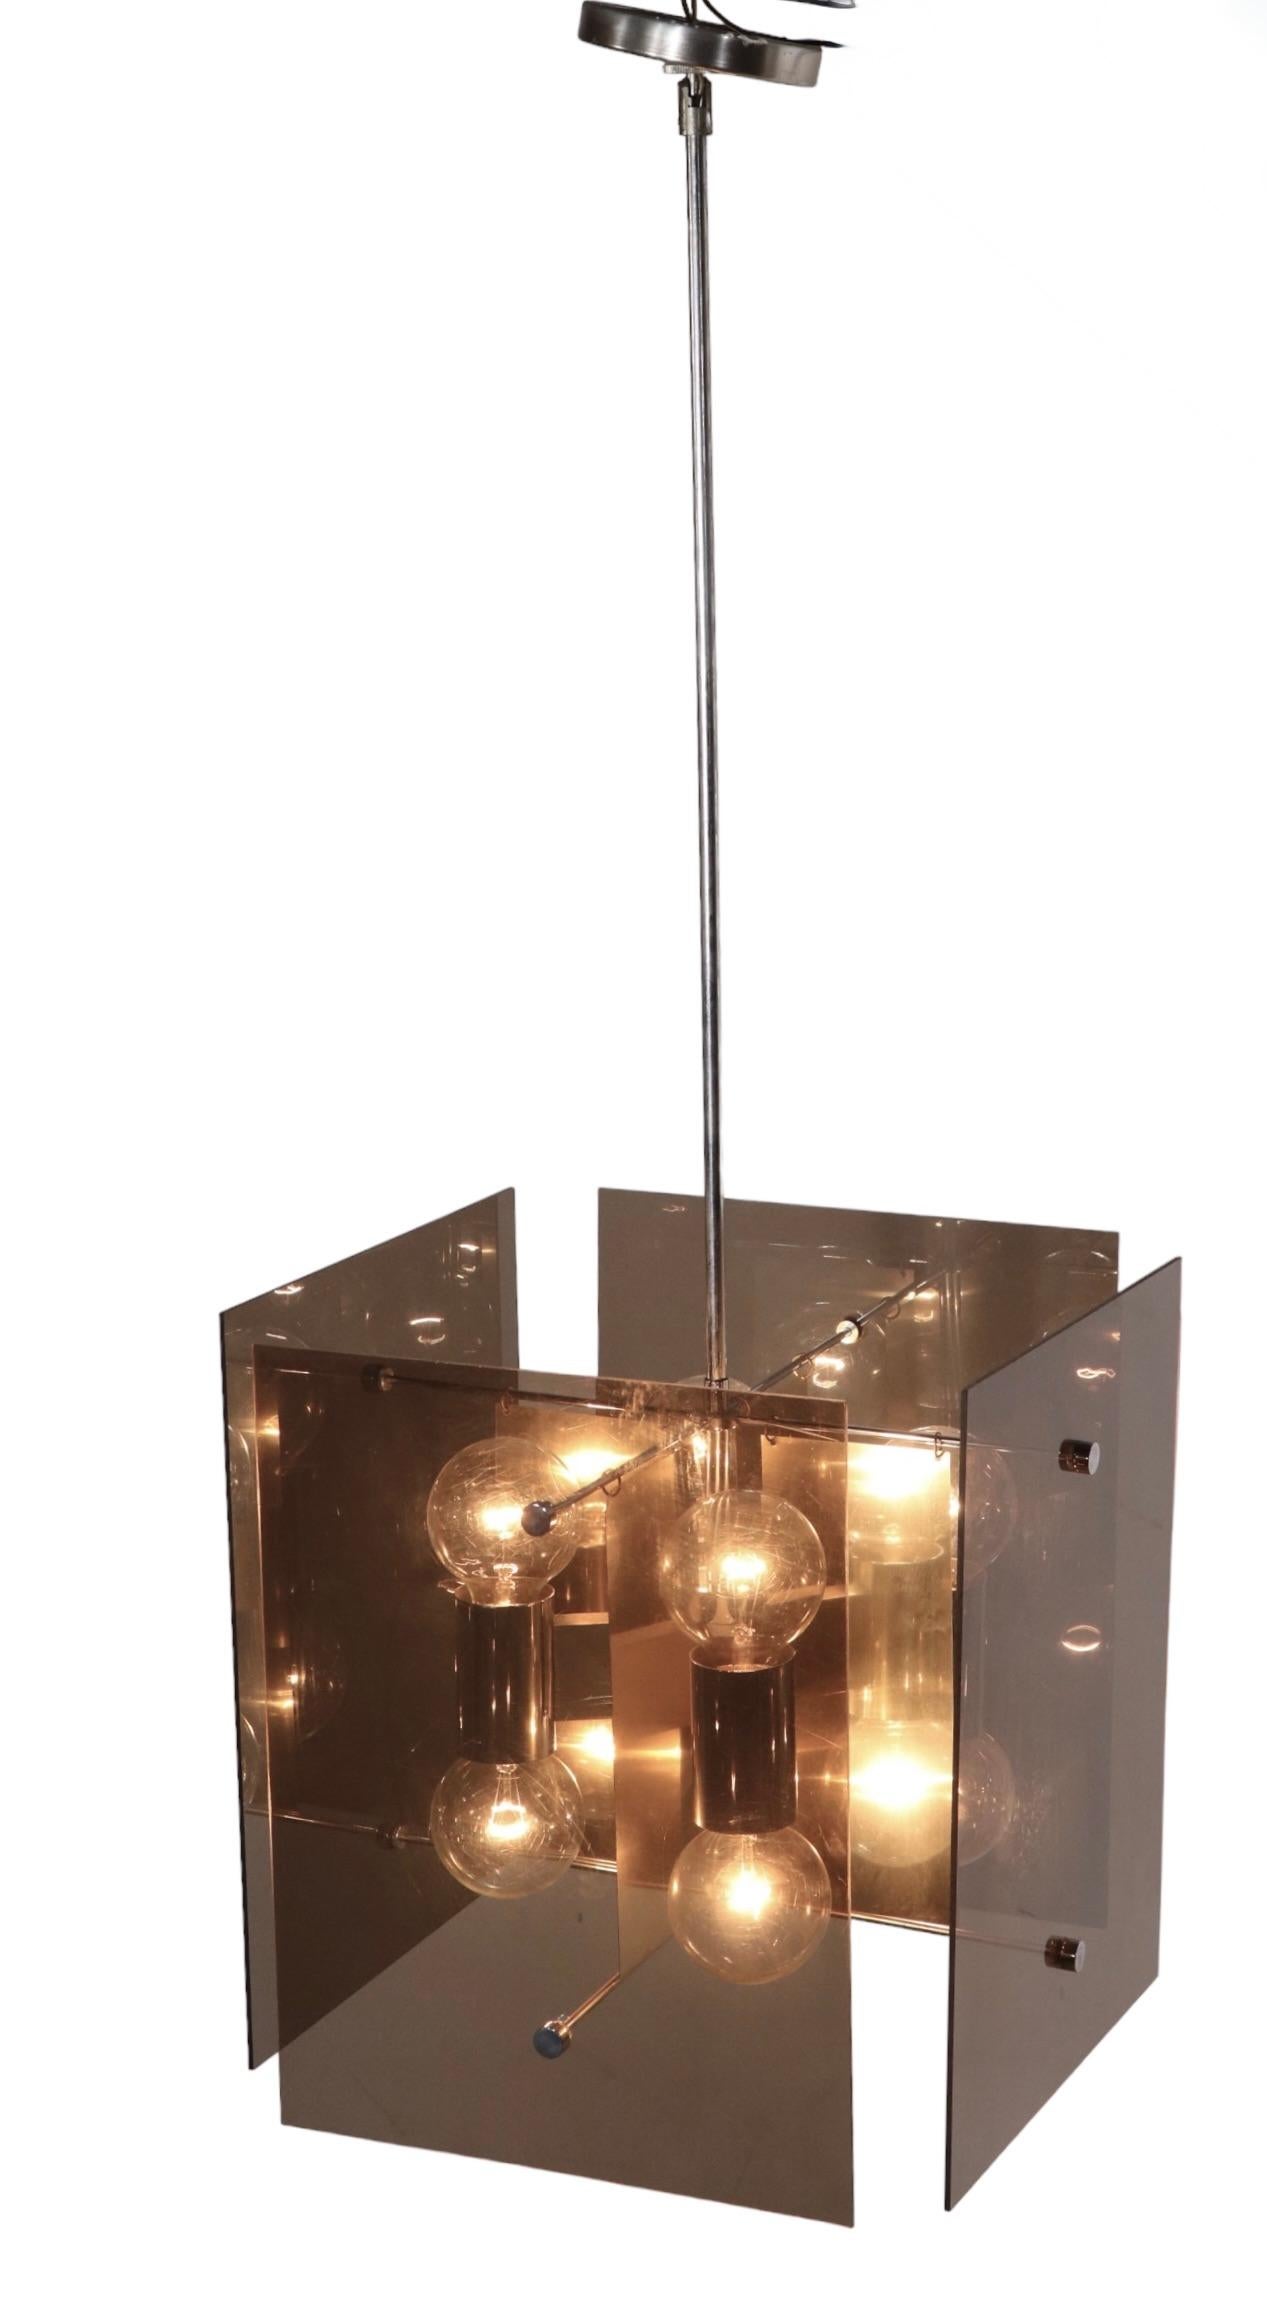 American Lightolier 1970's Tinted Lucite and Chrome Cube Form Chandelier For Sale